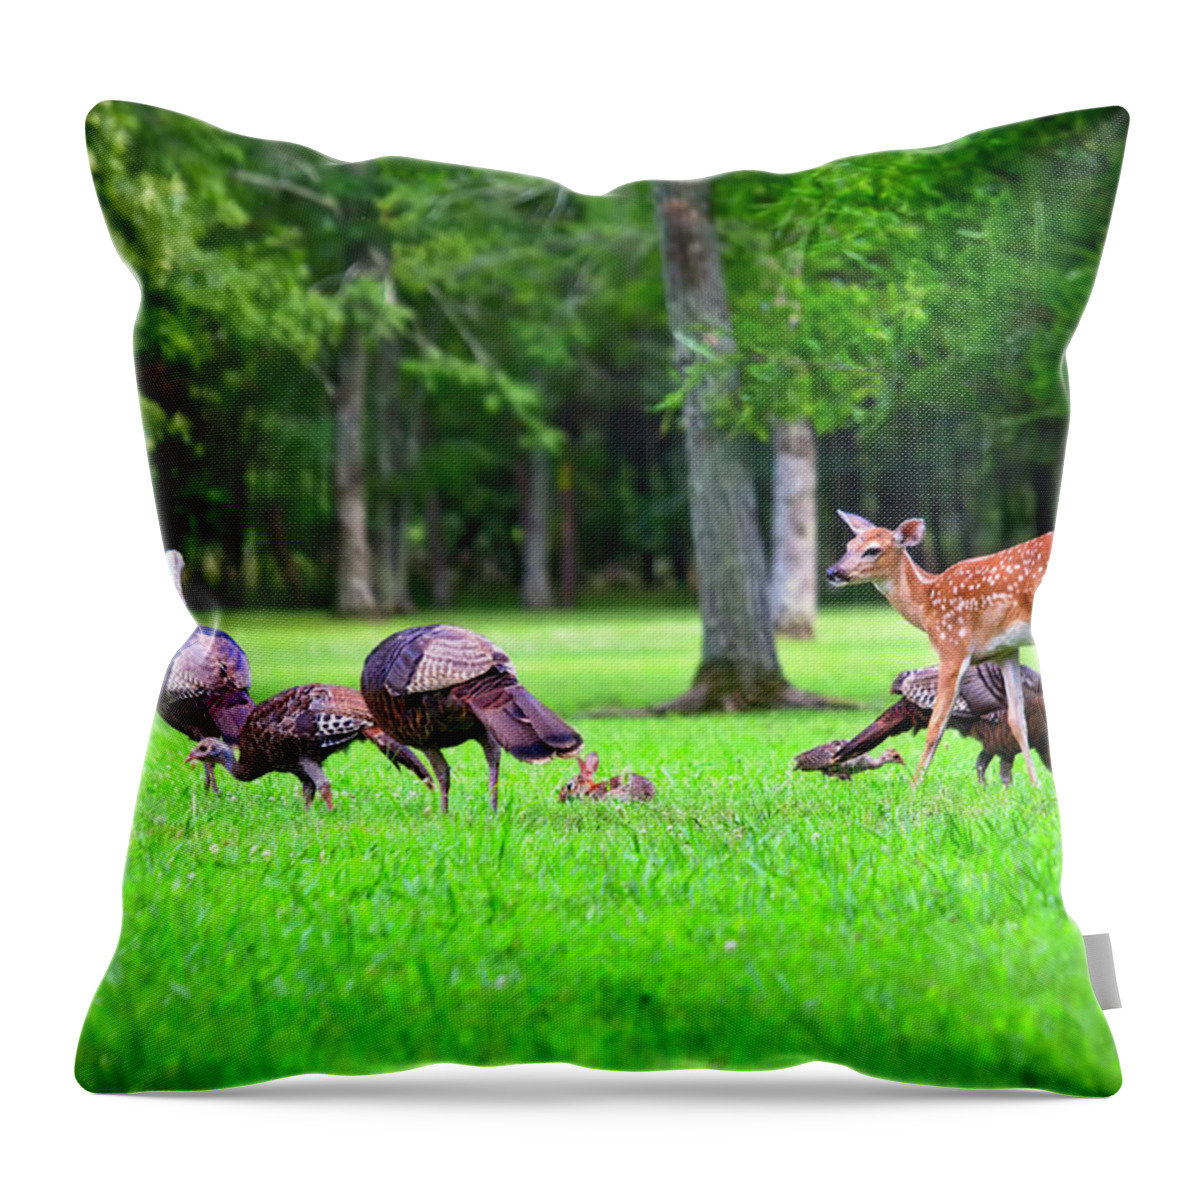 Wild Turkeys Throw Pillow featuring the photograph A Fawn, A Rabbit, And Wild Turkeys by Laura Vilandre